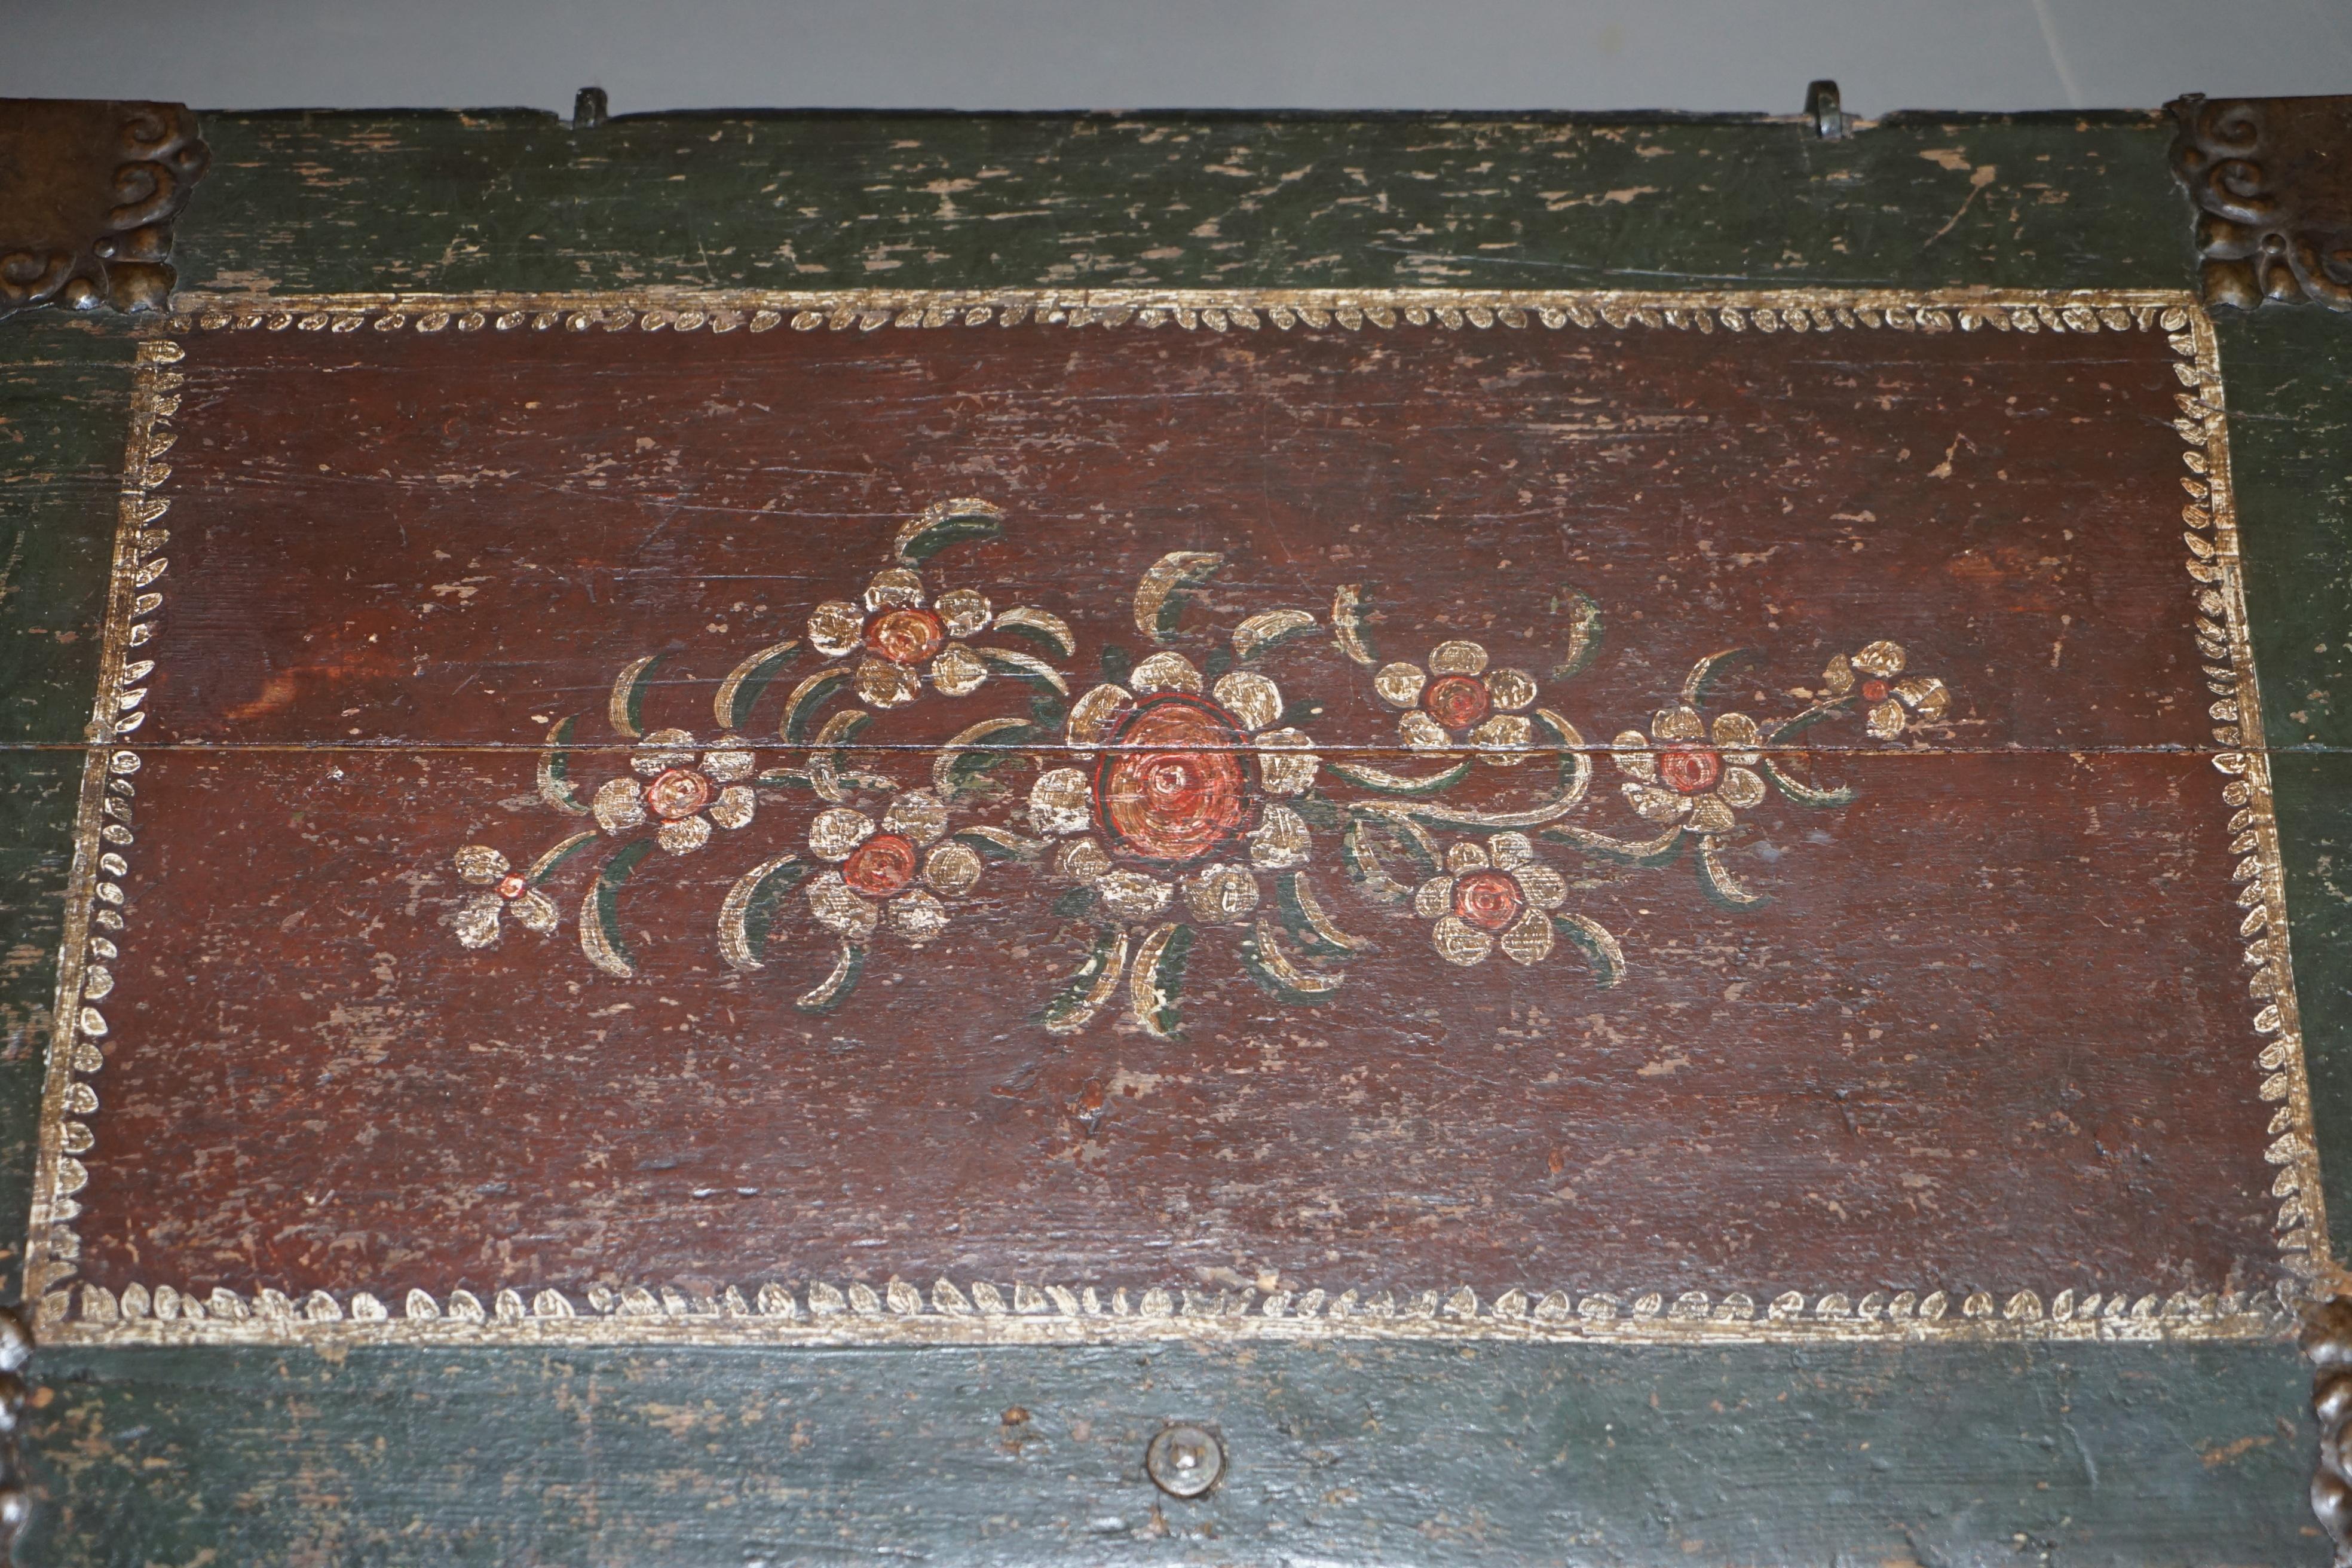 Late 18th Century Sublime 1797 Dated Hand Paitned Portugese Chest or Trunk for Linens Coffee Table For Sale